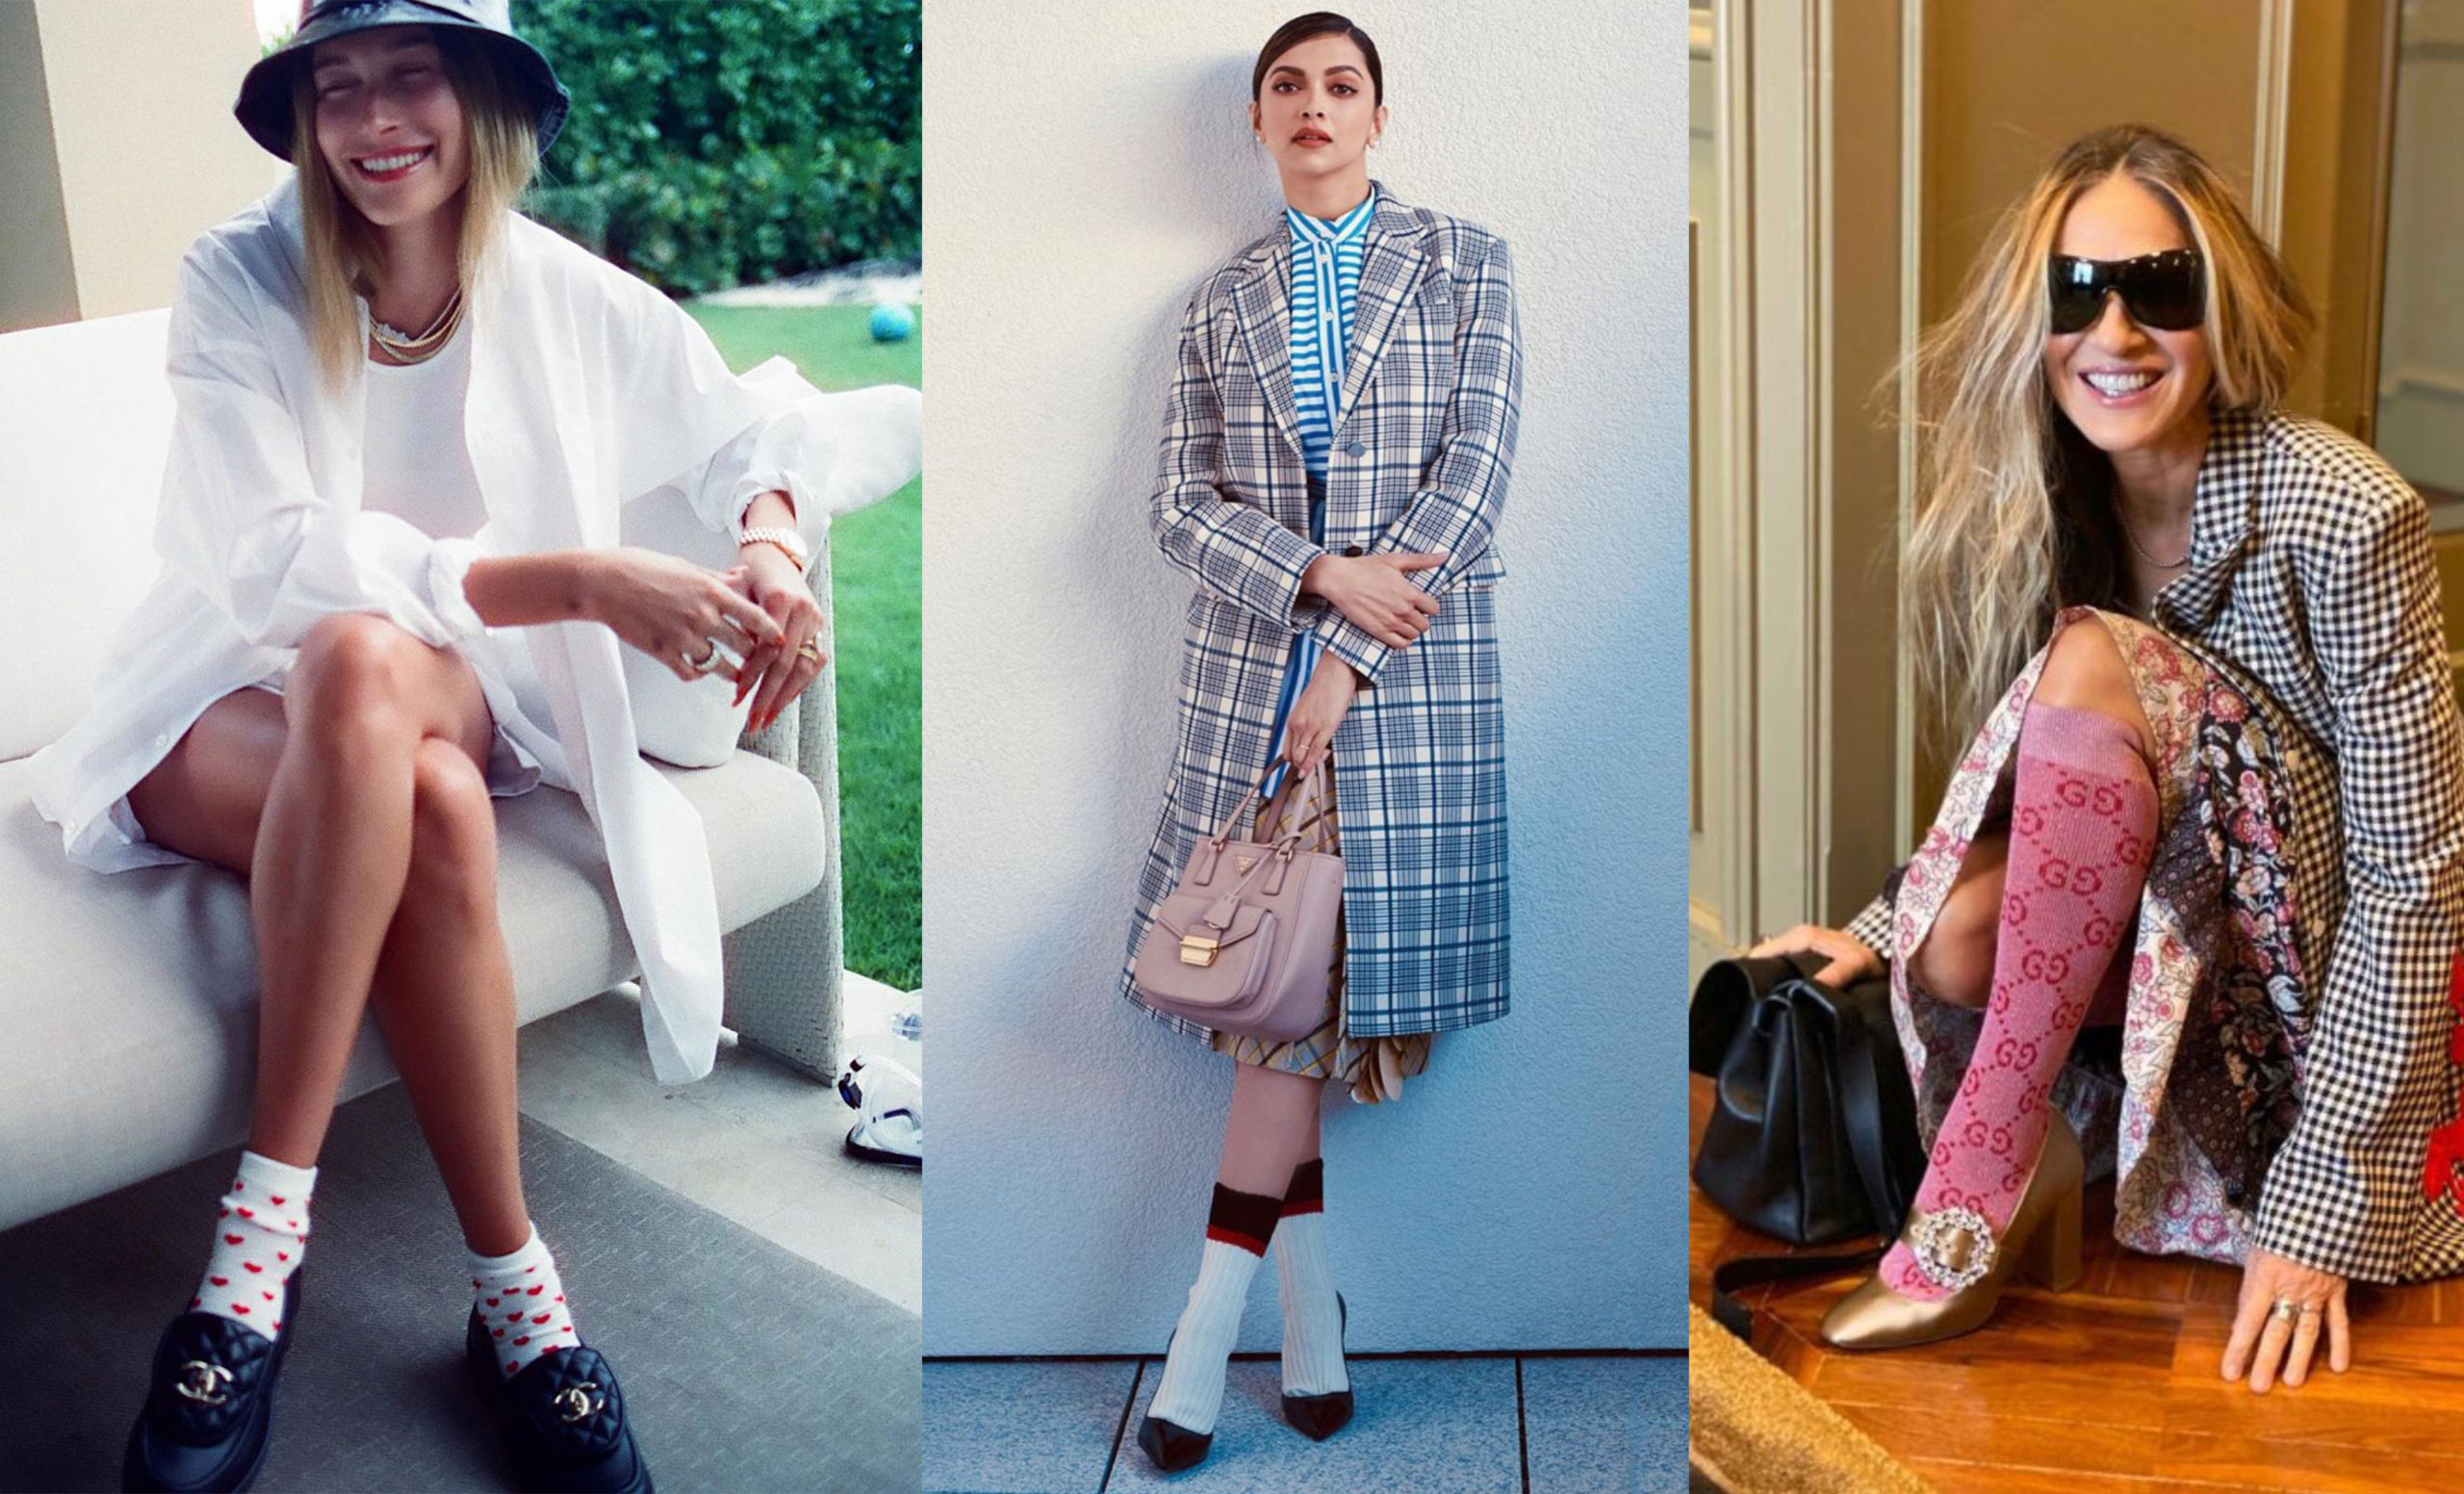 Wearing Socks? Here’s How You Can Style Them So Everyone Can See How Cool They Look!